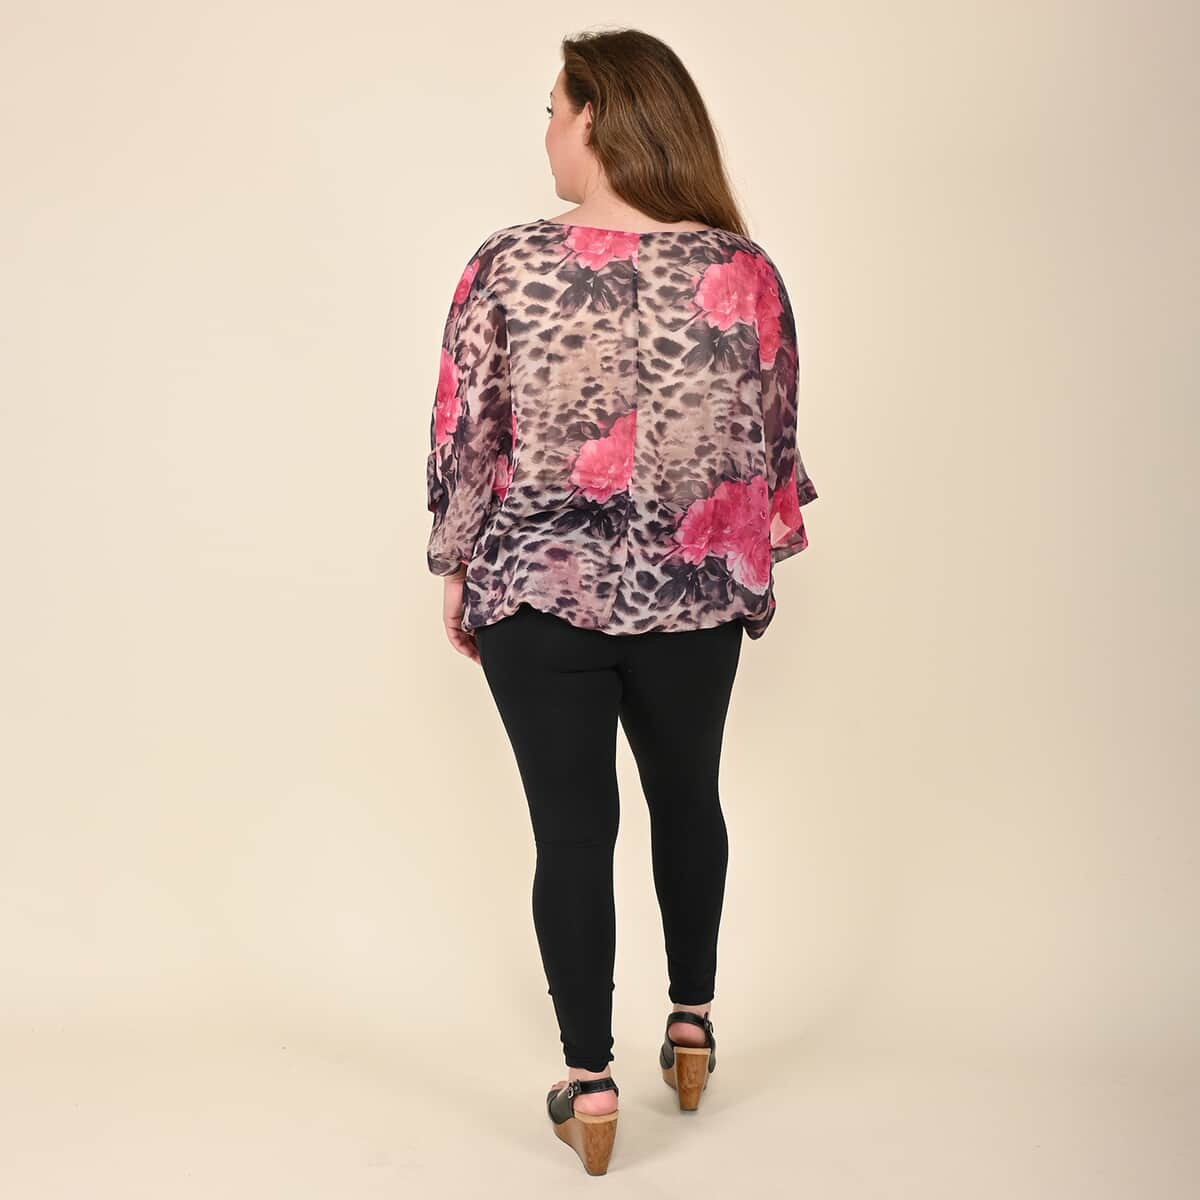 TAMSY Black Blouse with Red Floral Pattern - L image number 1